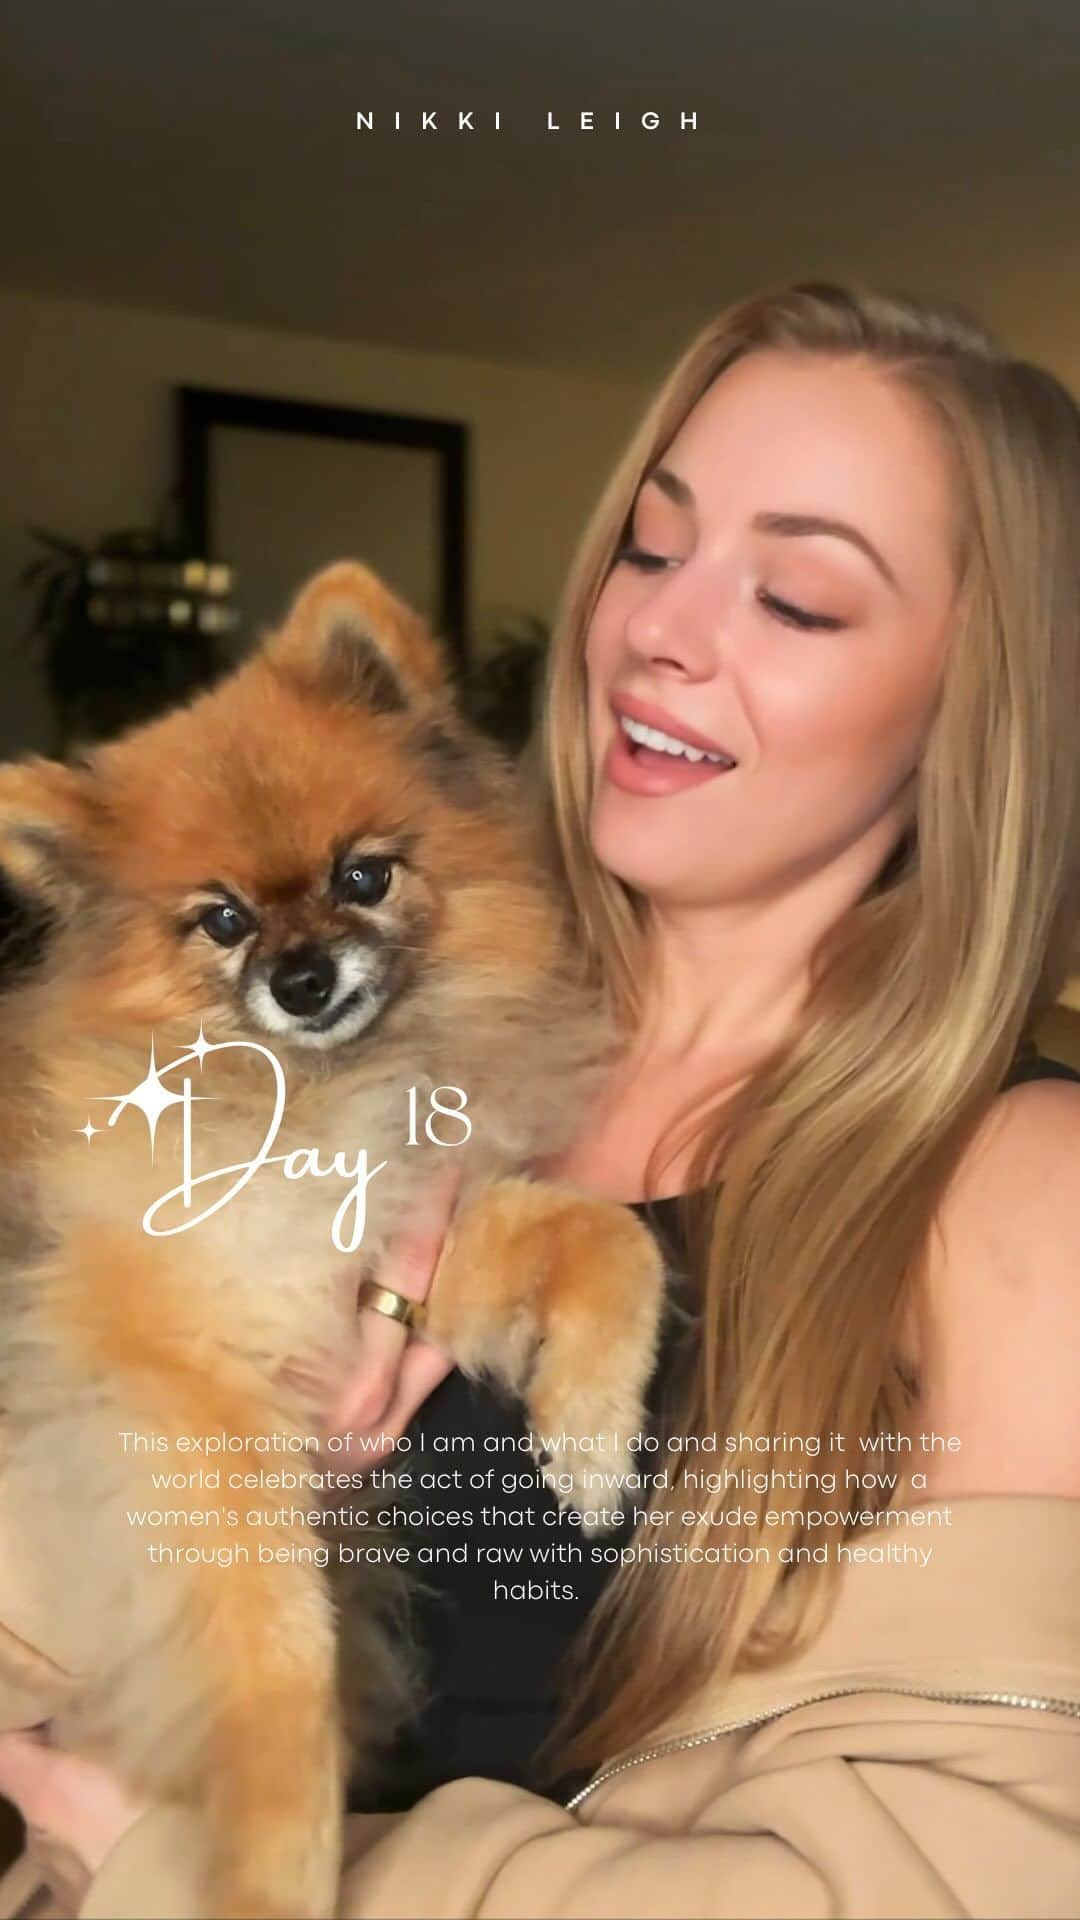 Nikki Leighのインスタグラム：「Day 18 #iam   so much of who I am is owed to this little one right here, Kodi. Kodi is such an independent stud that has helped me become the woman I am today. He has been there through it all, life’s ups and downs, adventures and depressions. And all the while still loving me and being patiently kind. He is my Angel and he shows me the good that is in the world. I love being a dog mom to this beautiful angel!   #mentalhealth #iam #beyou #bewhoyouare #foryou #fyp #dogmom #life #selfcare #partnership #unconditionallove #motivation #selfless #positivevibes #positivitytime」